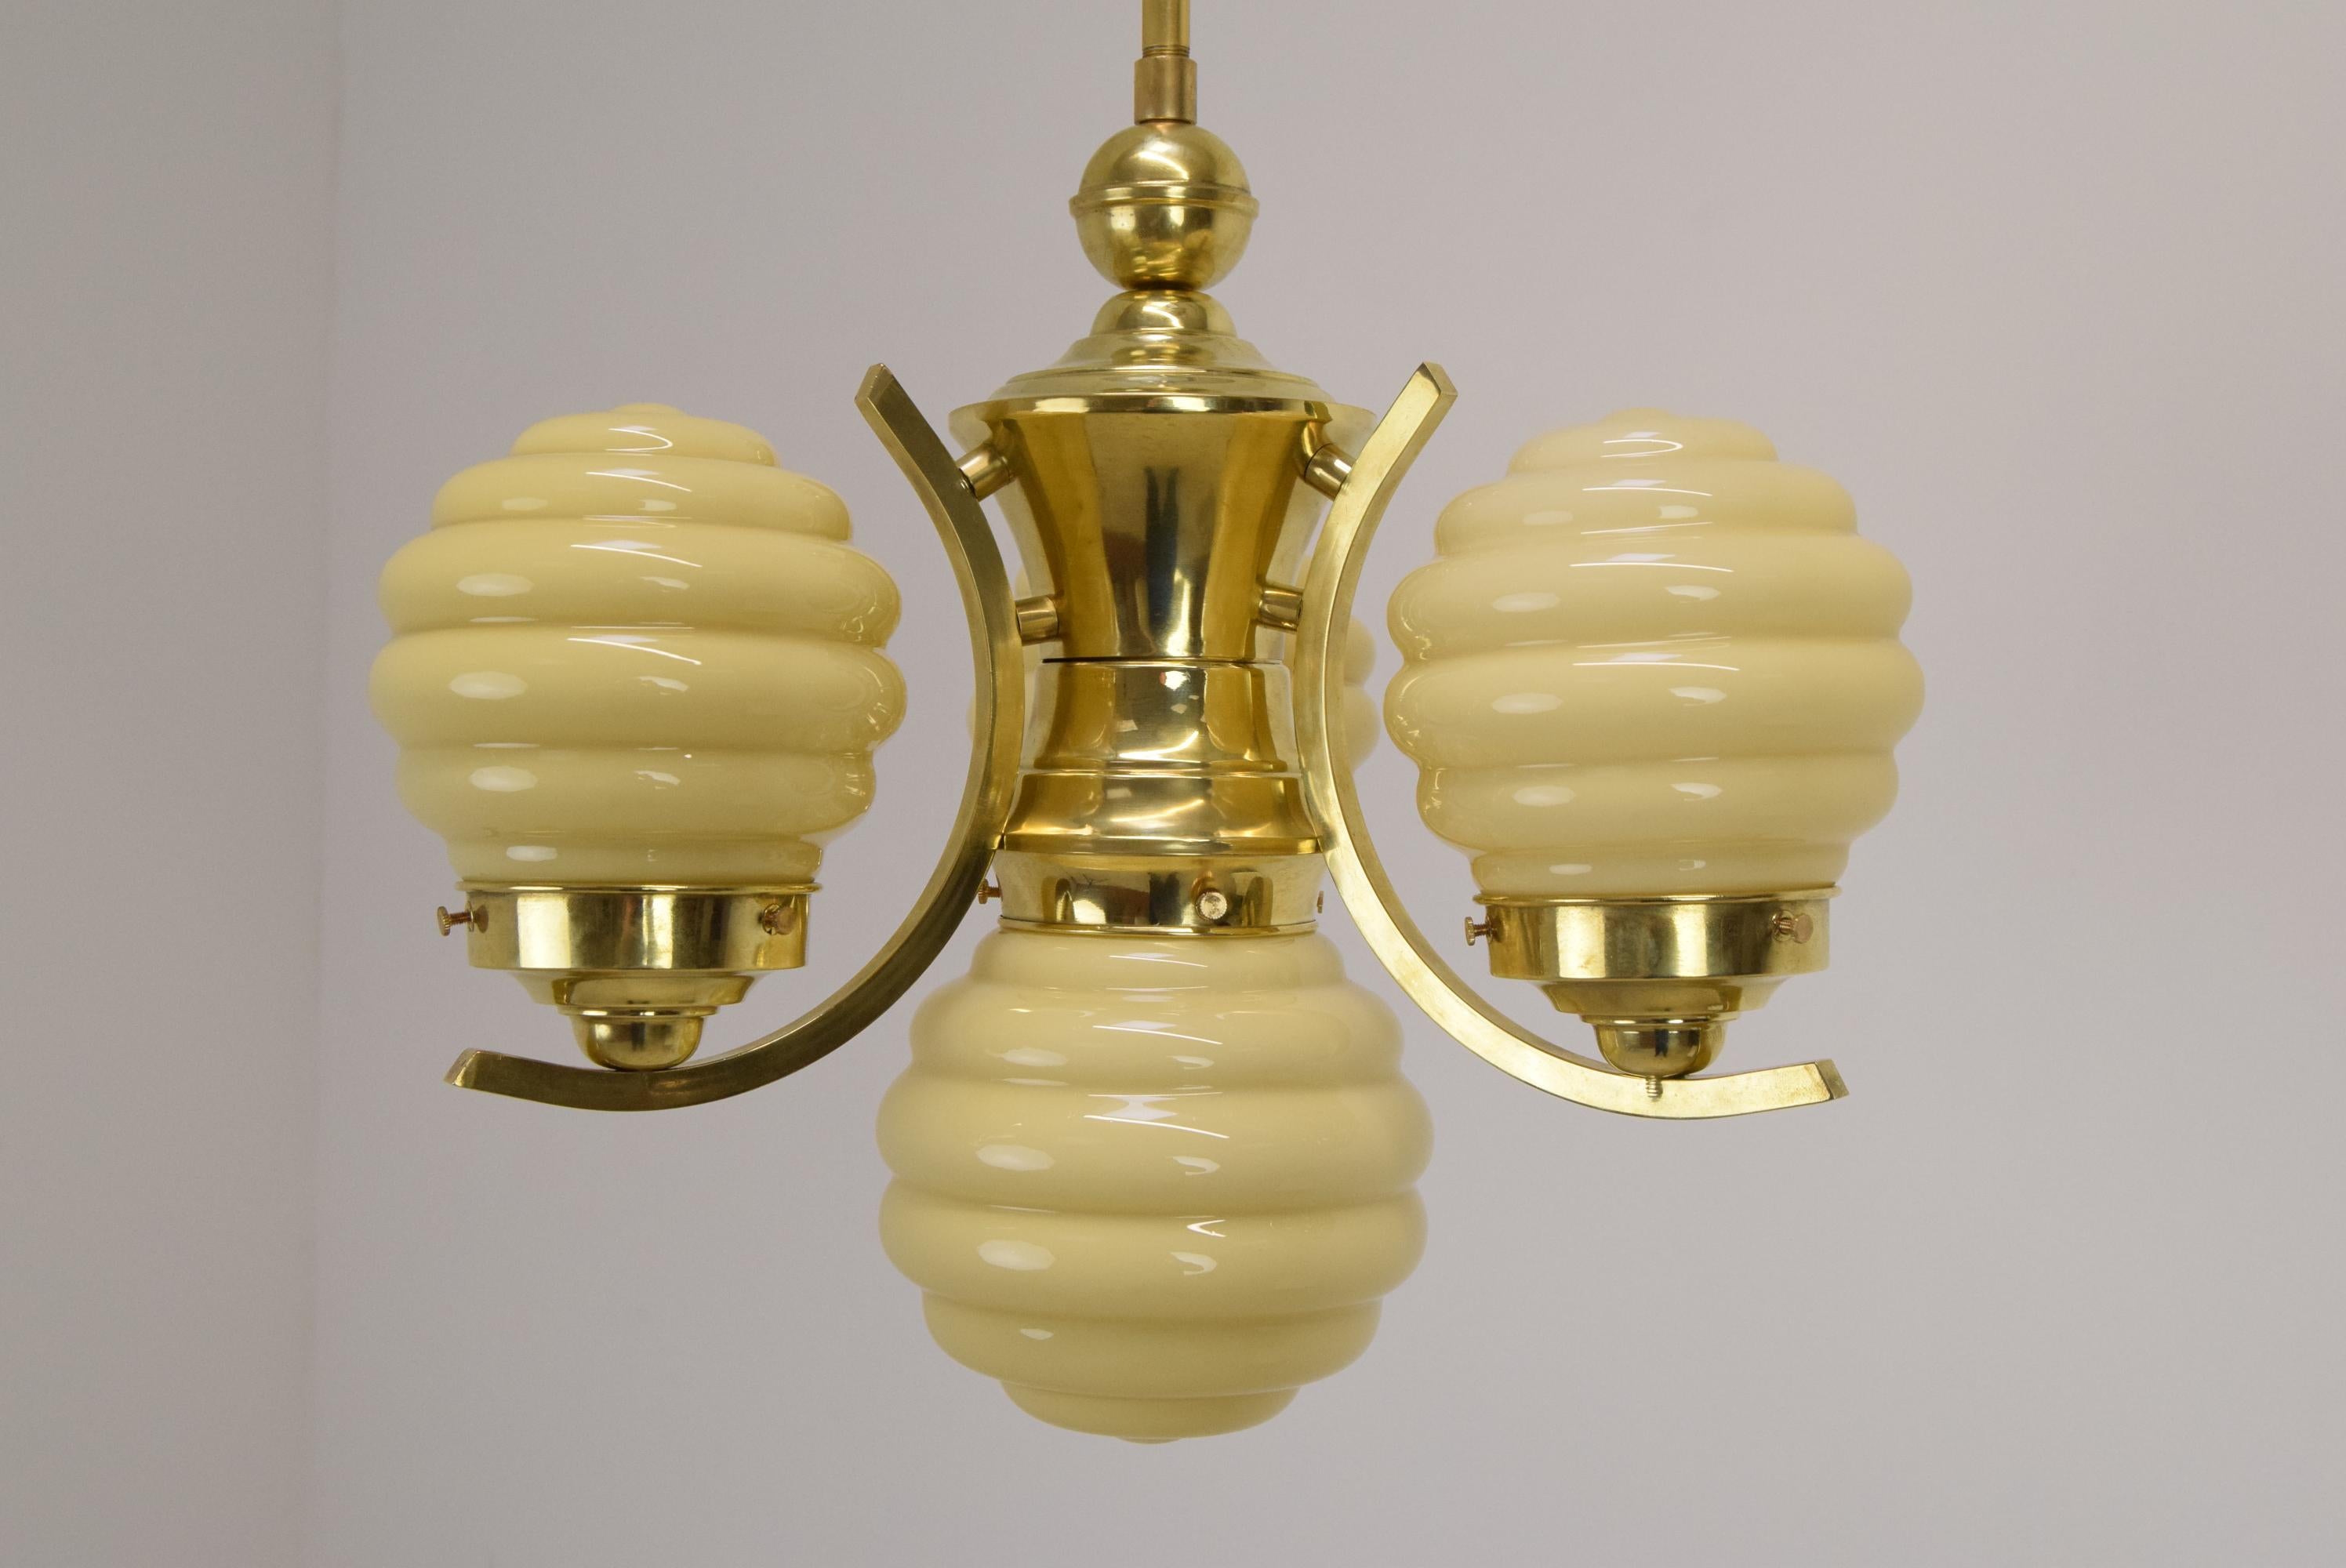 Made of glass, brass
4xE27 or E26 bulb
The Chandelier was completely disassembled and cleaned
With aged patina
It is equipped 
with a new electrical installation
US wiring compatible
Good original condition.